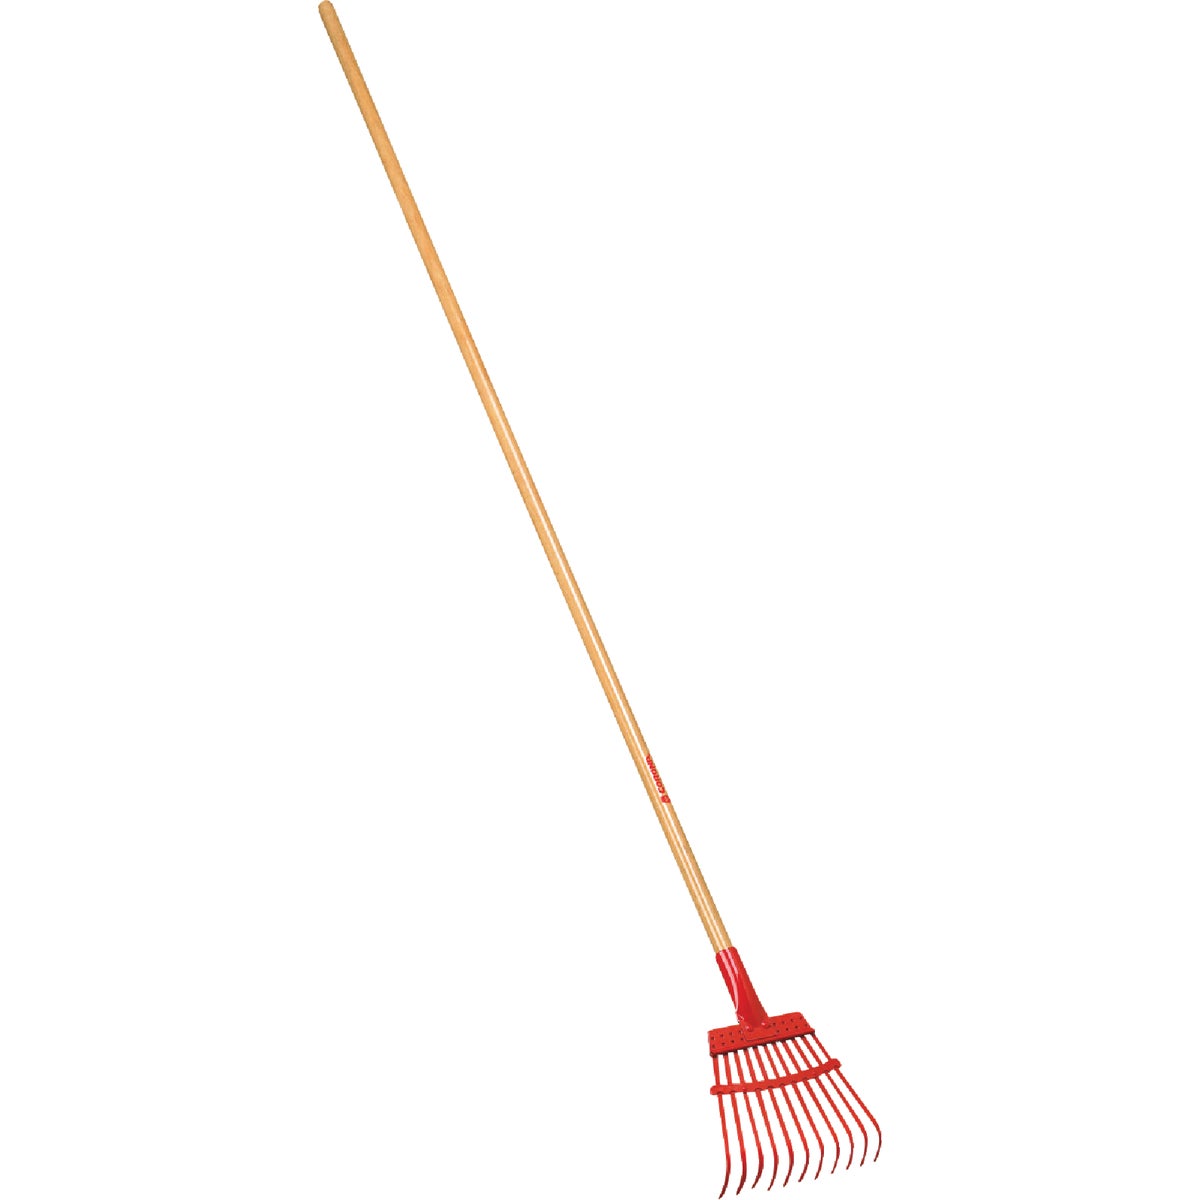 Item 739308, This shrub rake has tempered spring steel for greater durability and long 